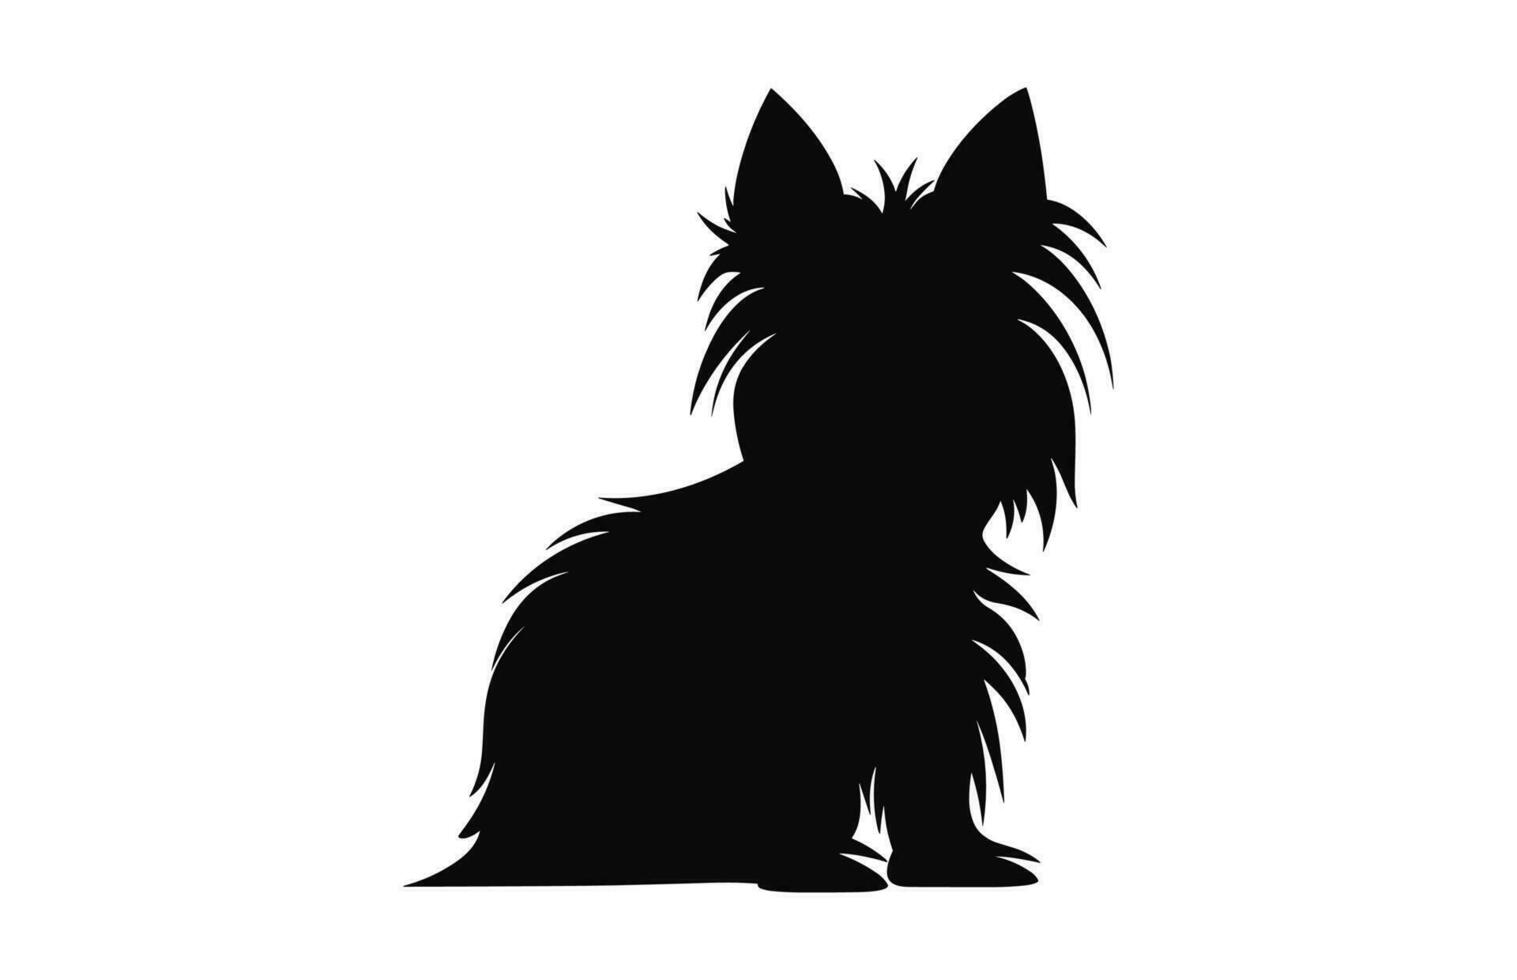 A Yorkshire Terrier Dog black Silhouette vector free